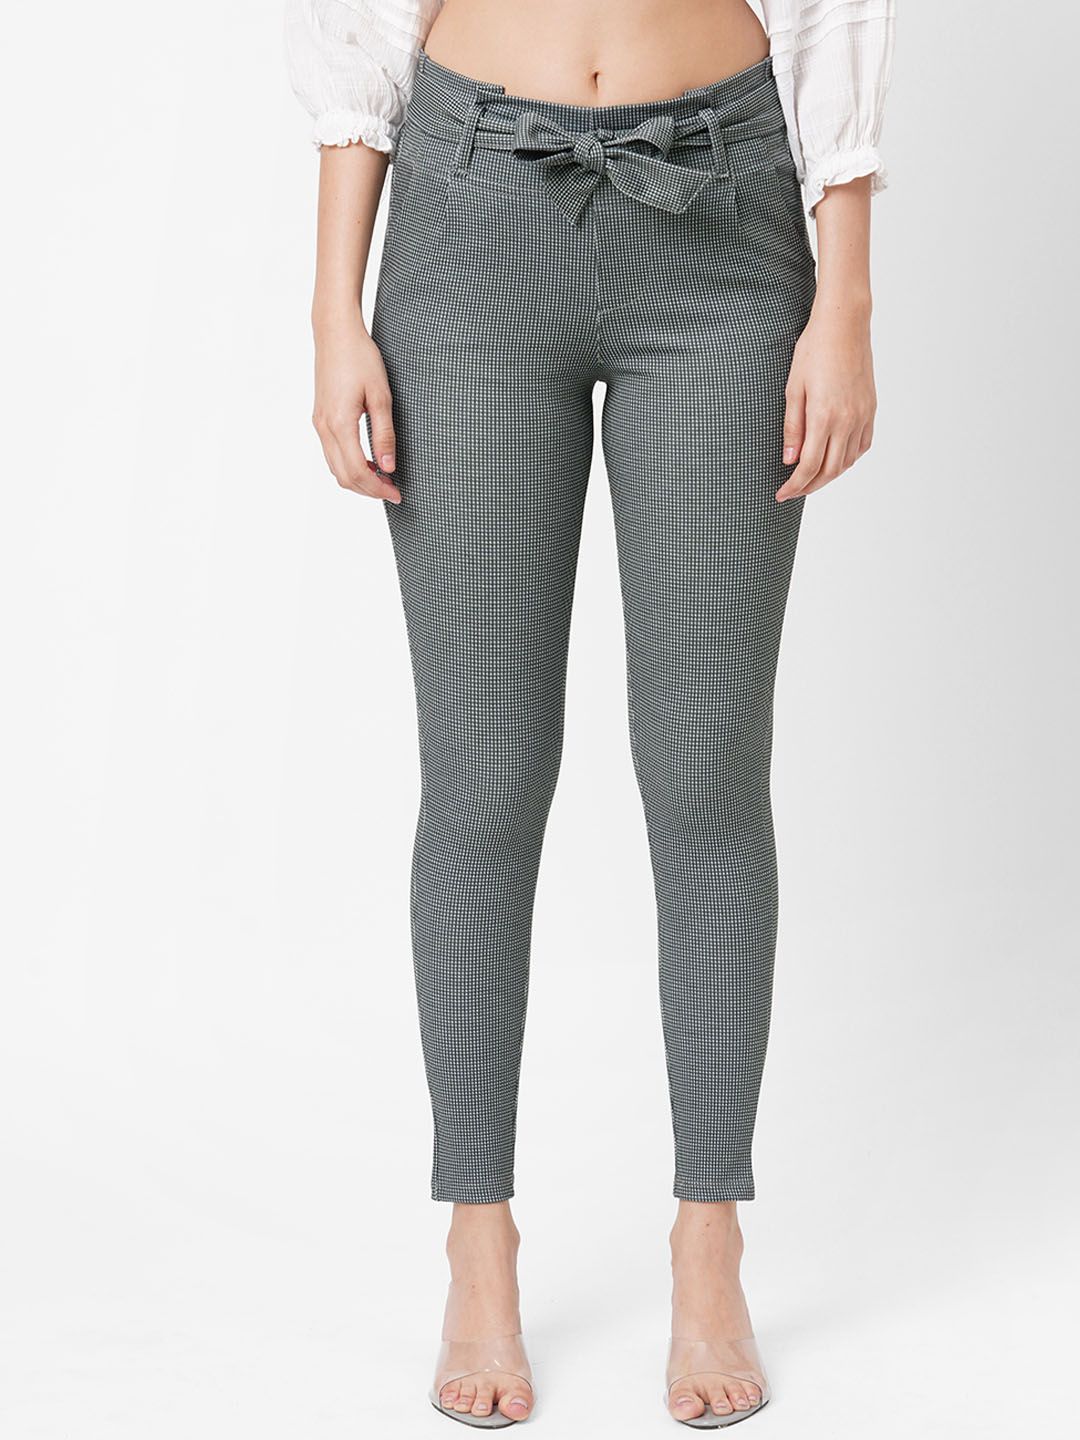 Kraus Jeans Women Grey Checked High-Rise Trousers Price in India